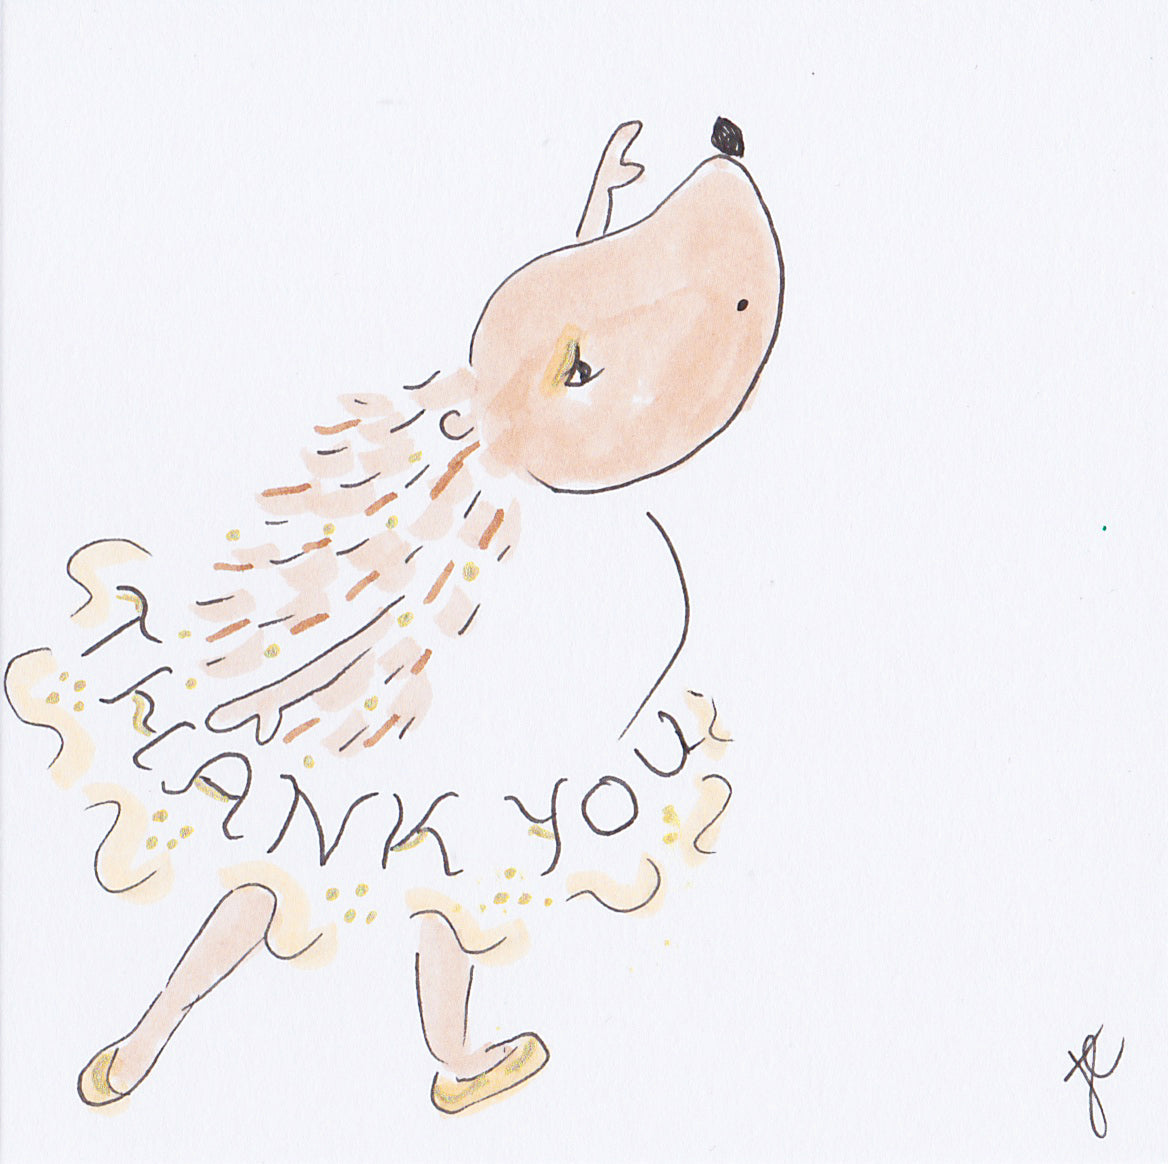 Hedgie Ballettoons illustration with thank you hand-lettered on the tutu